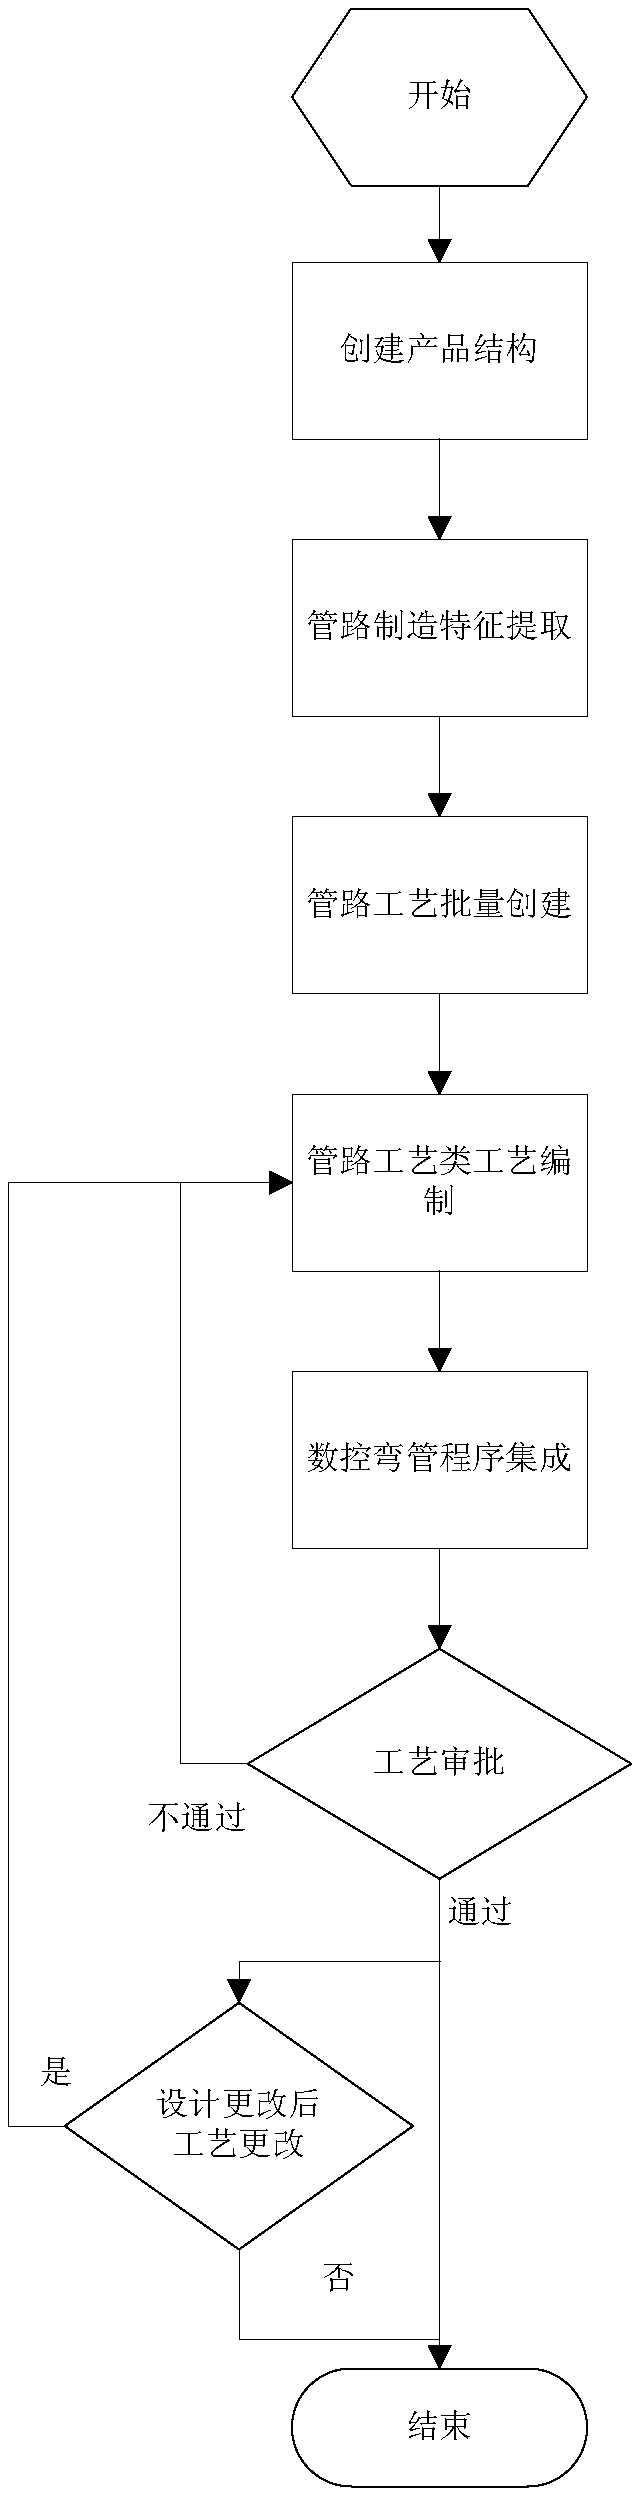 Pipeline welding process batch planning system and method based on characteristics